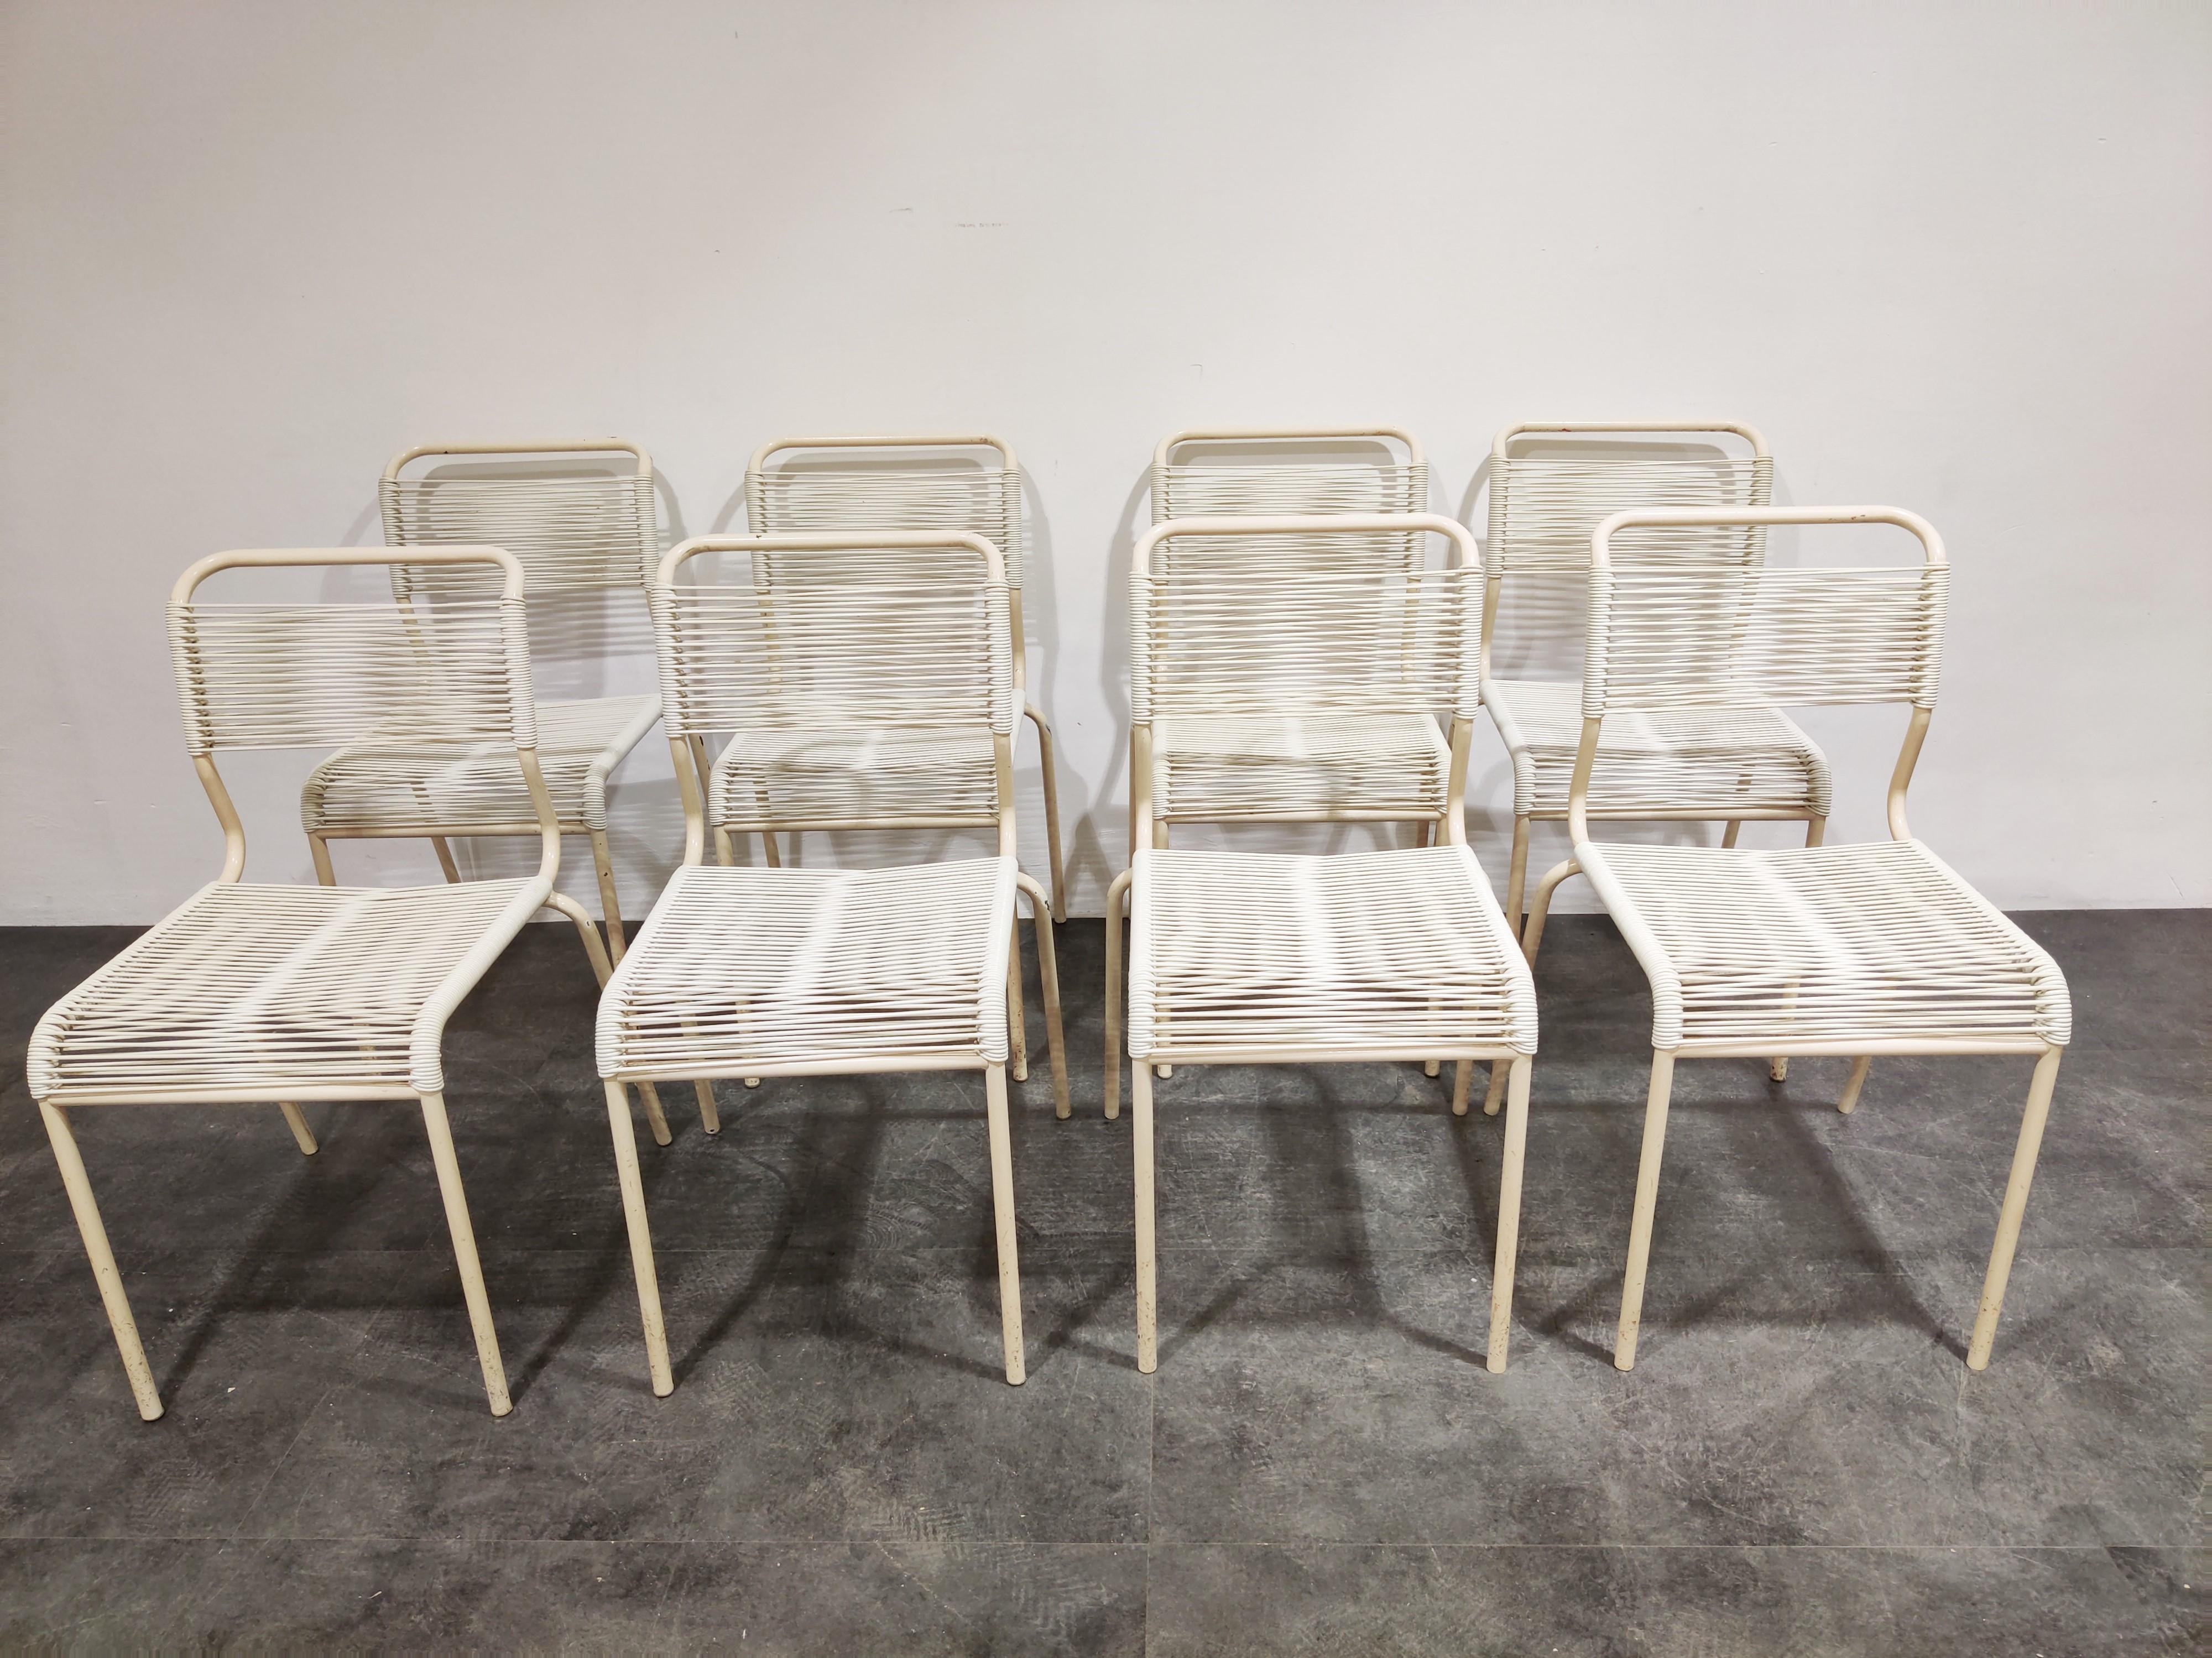 Set of 6 midcentury so called 'spaghetti' or 'scoubidou' garden chairs or dining chairs.

The chairs have a white aluminum frame and pvc cords.

The chairs where used mostly inside therefore the plastic wires are all in good condition.

Some